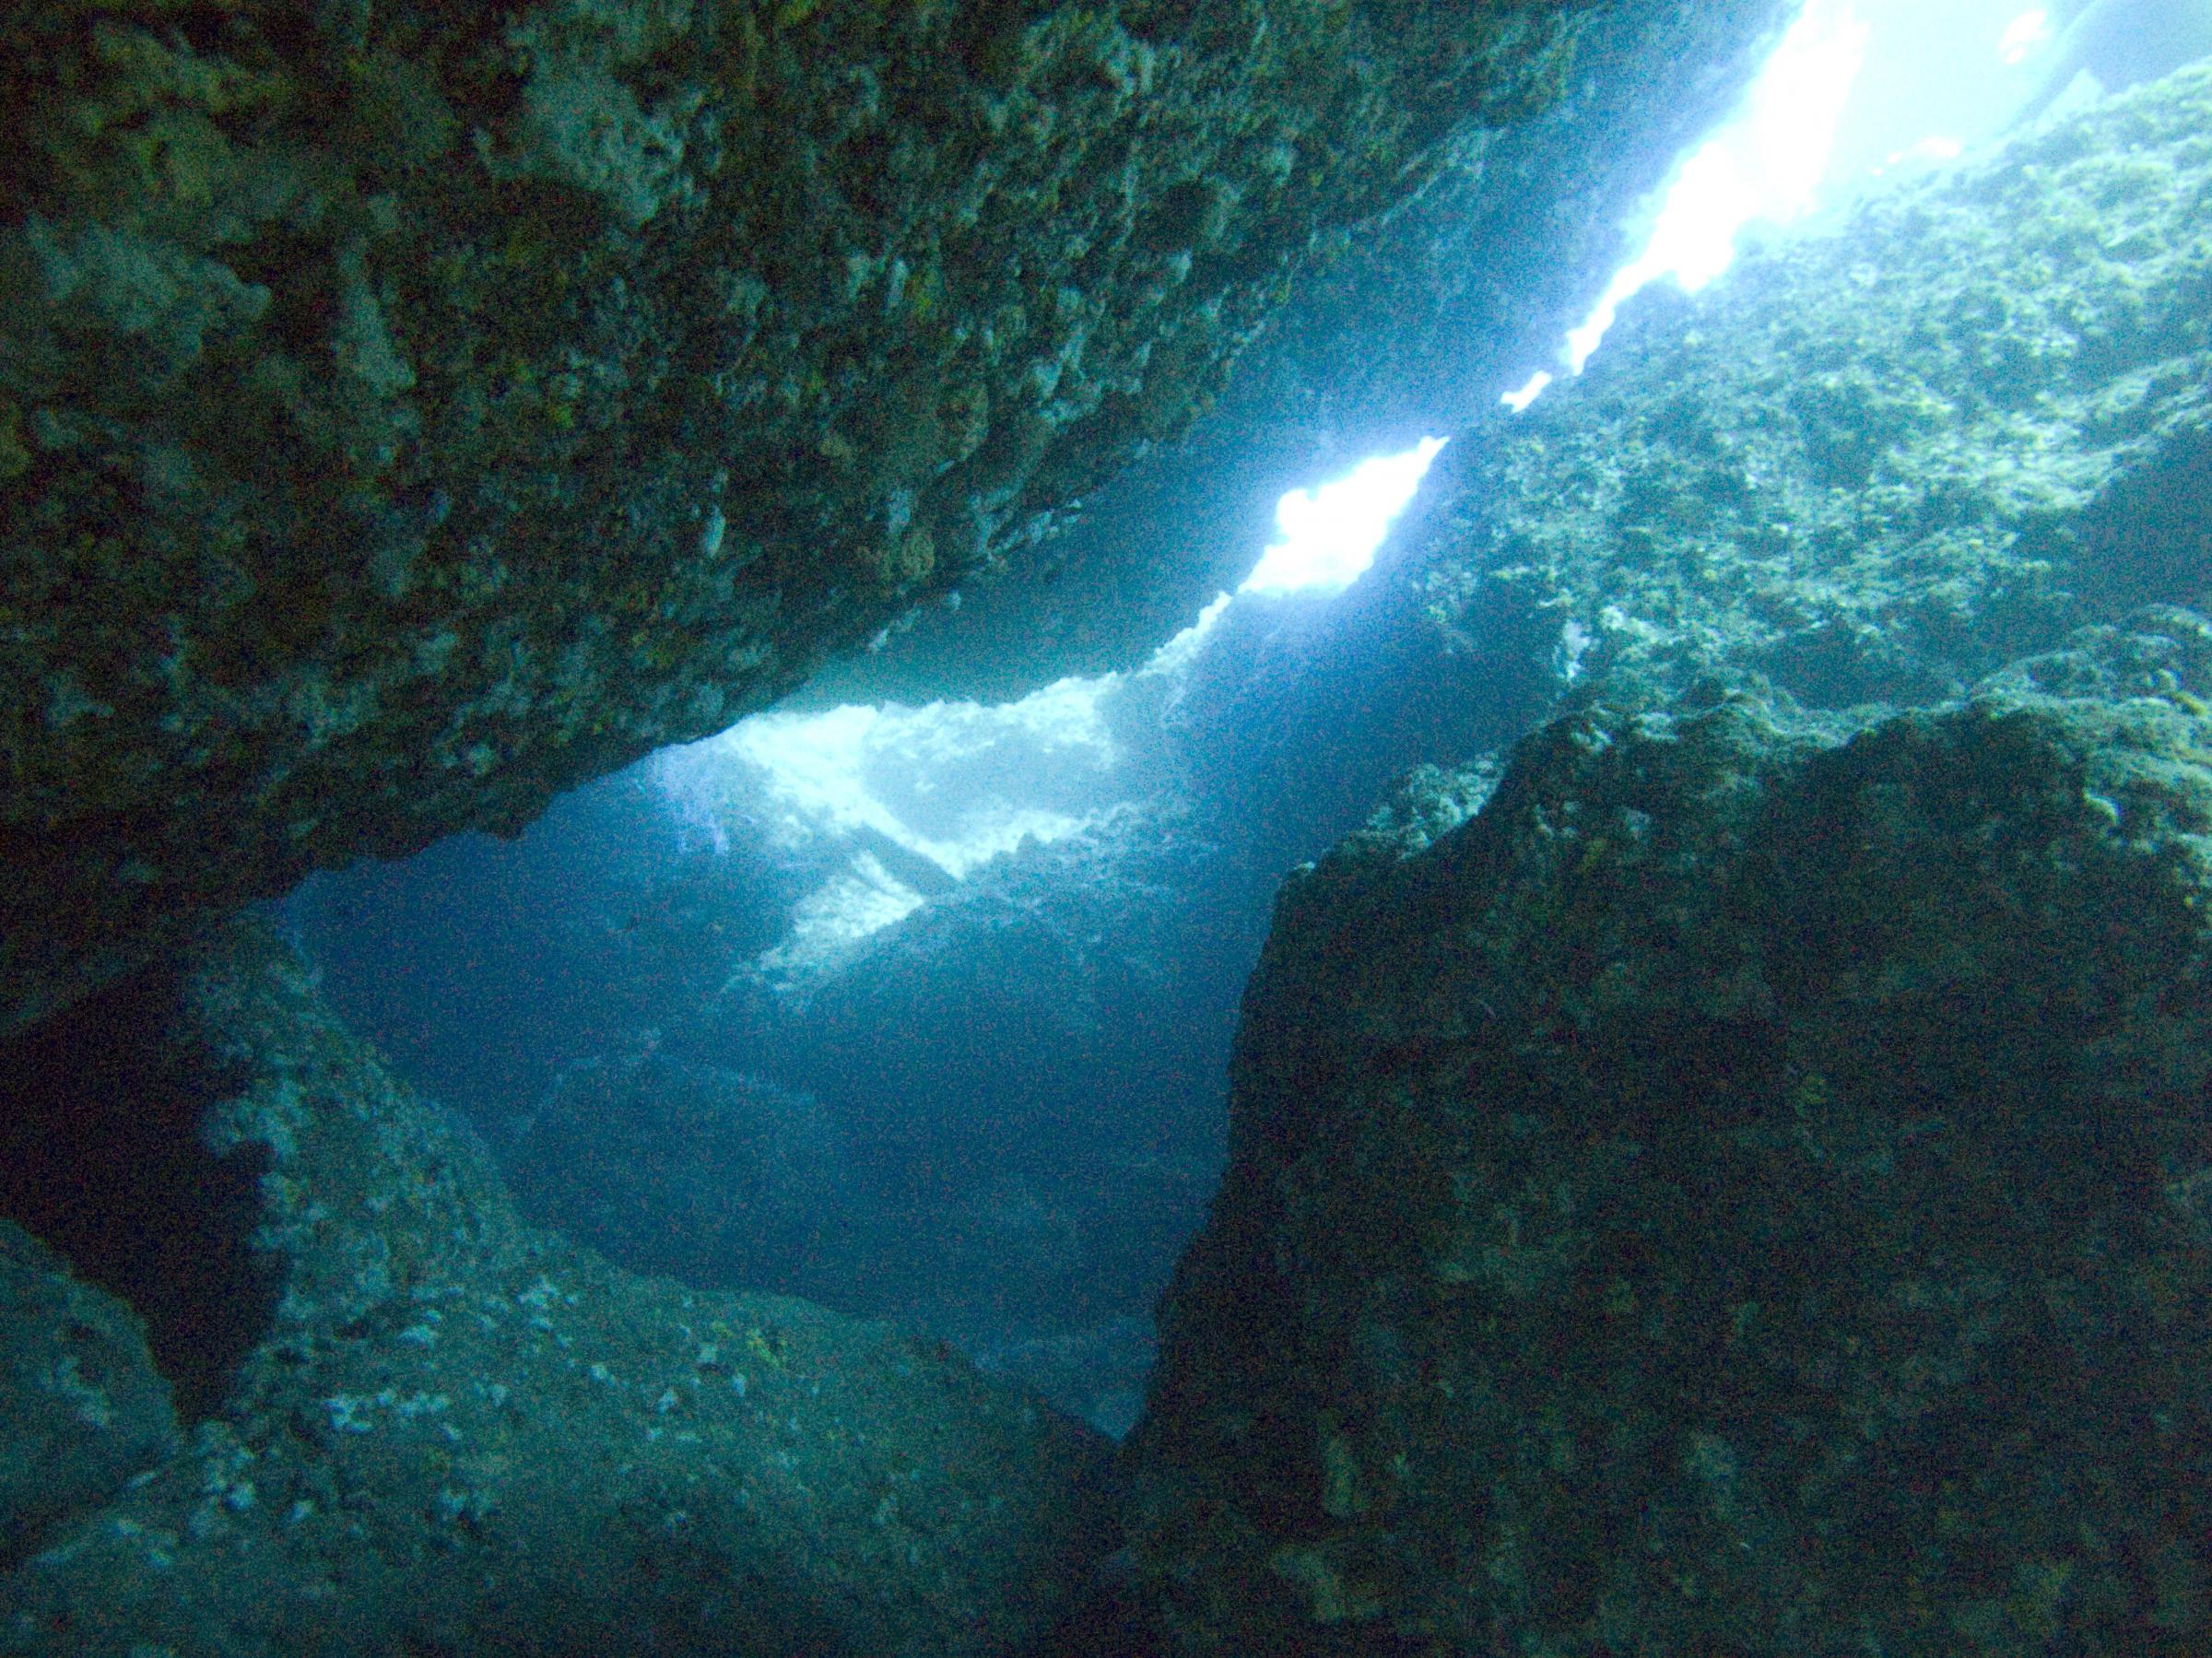 Caverns under the boulders of Lantern Point